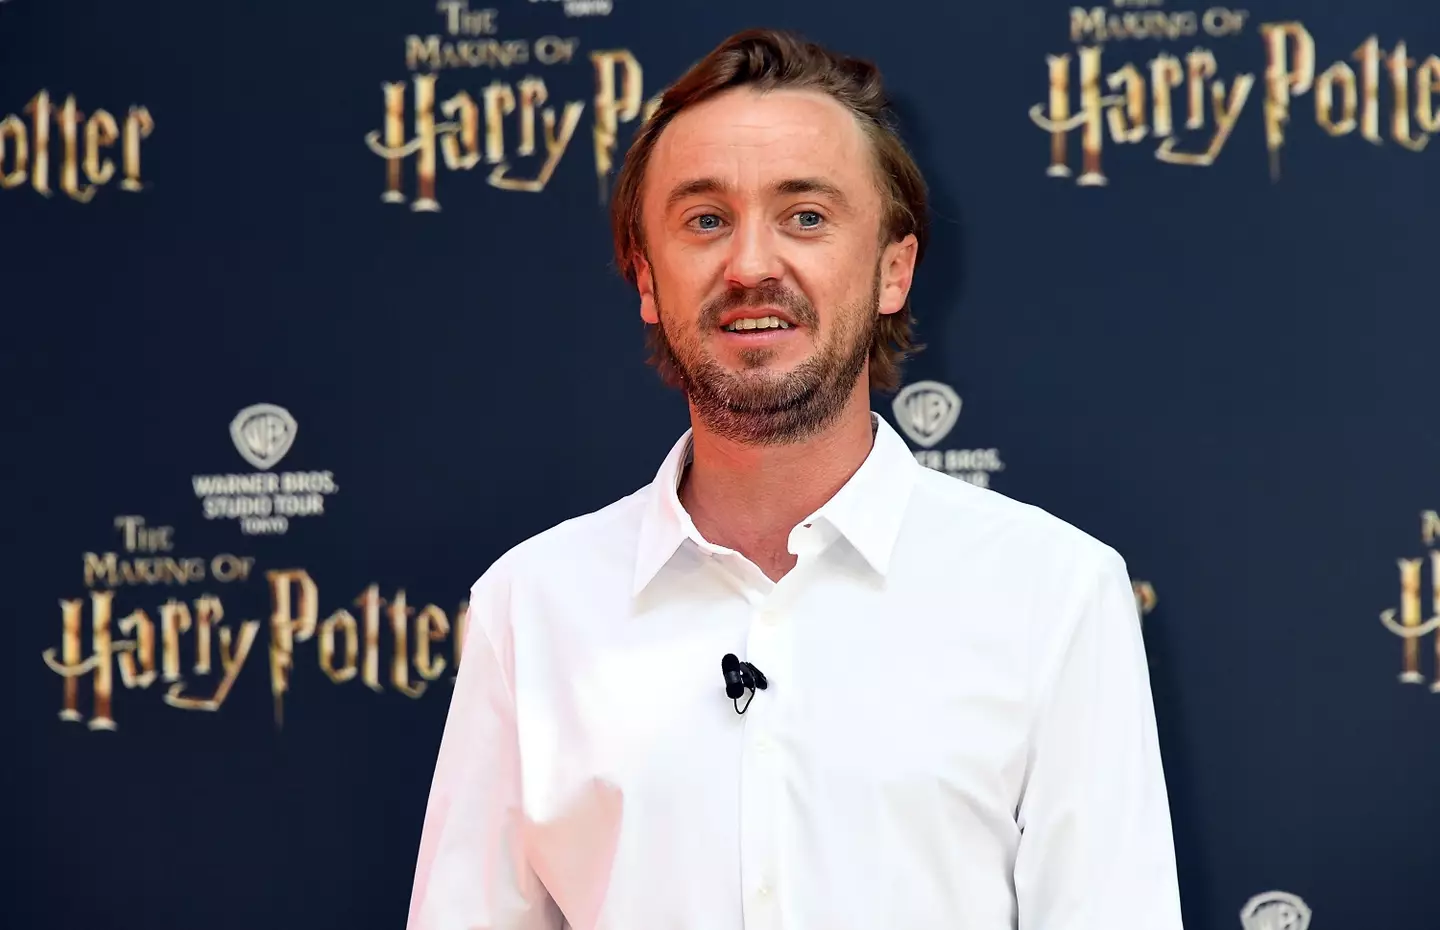 Tom Felton is best known for his role as Draco Malfoy in the Harry Potter films.